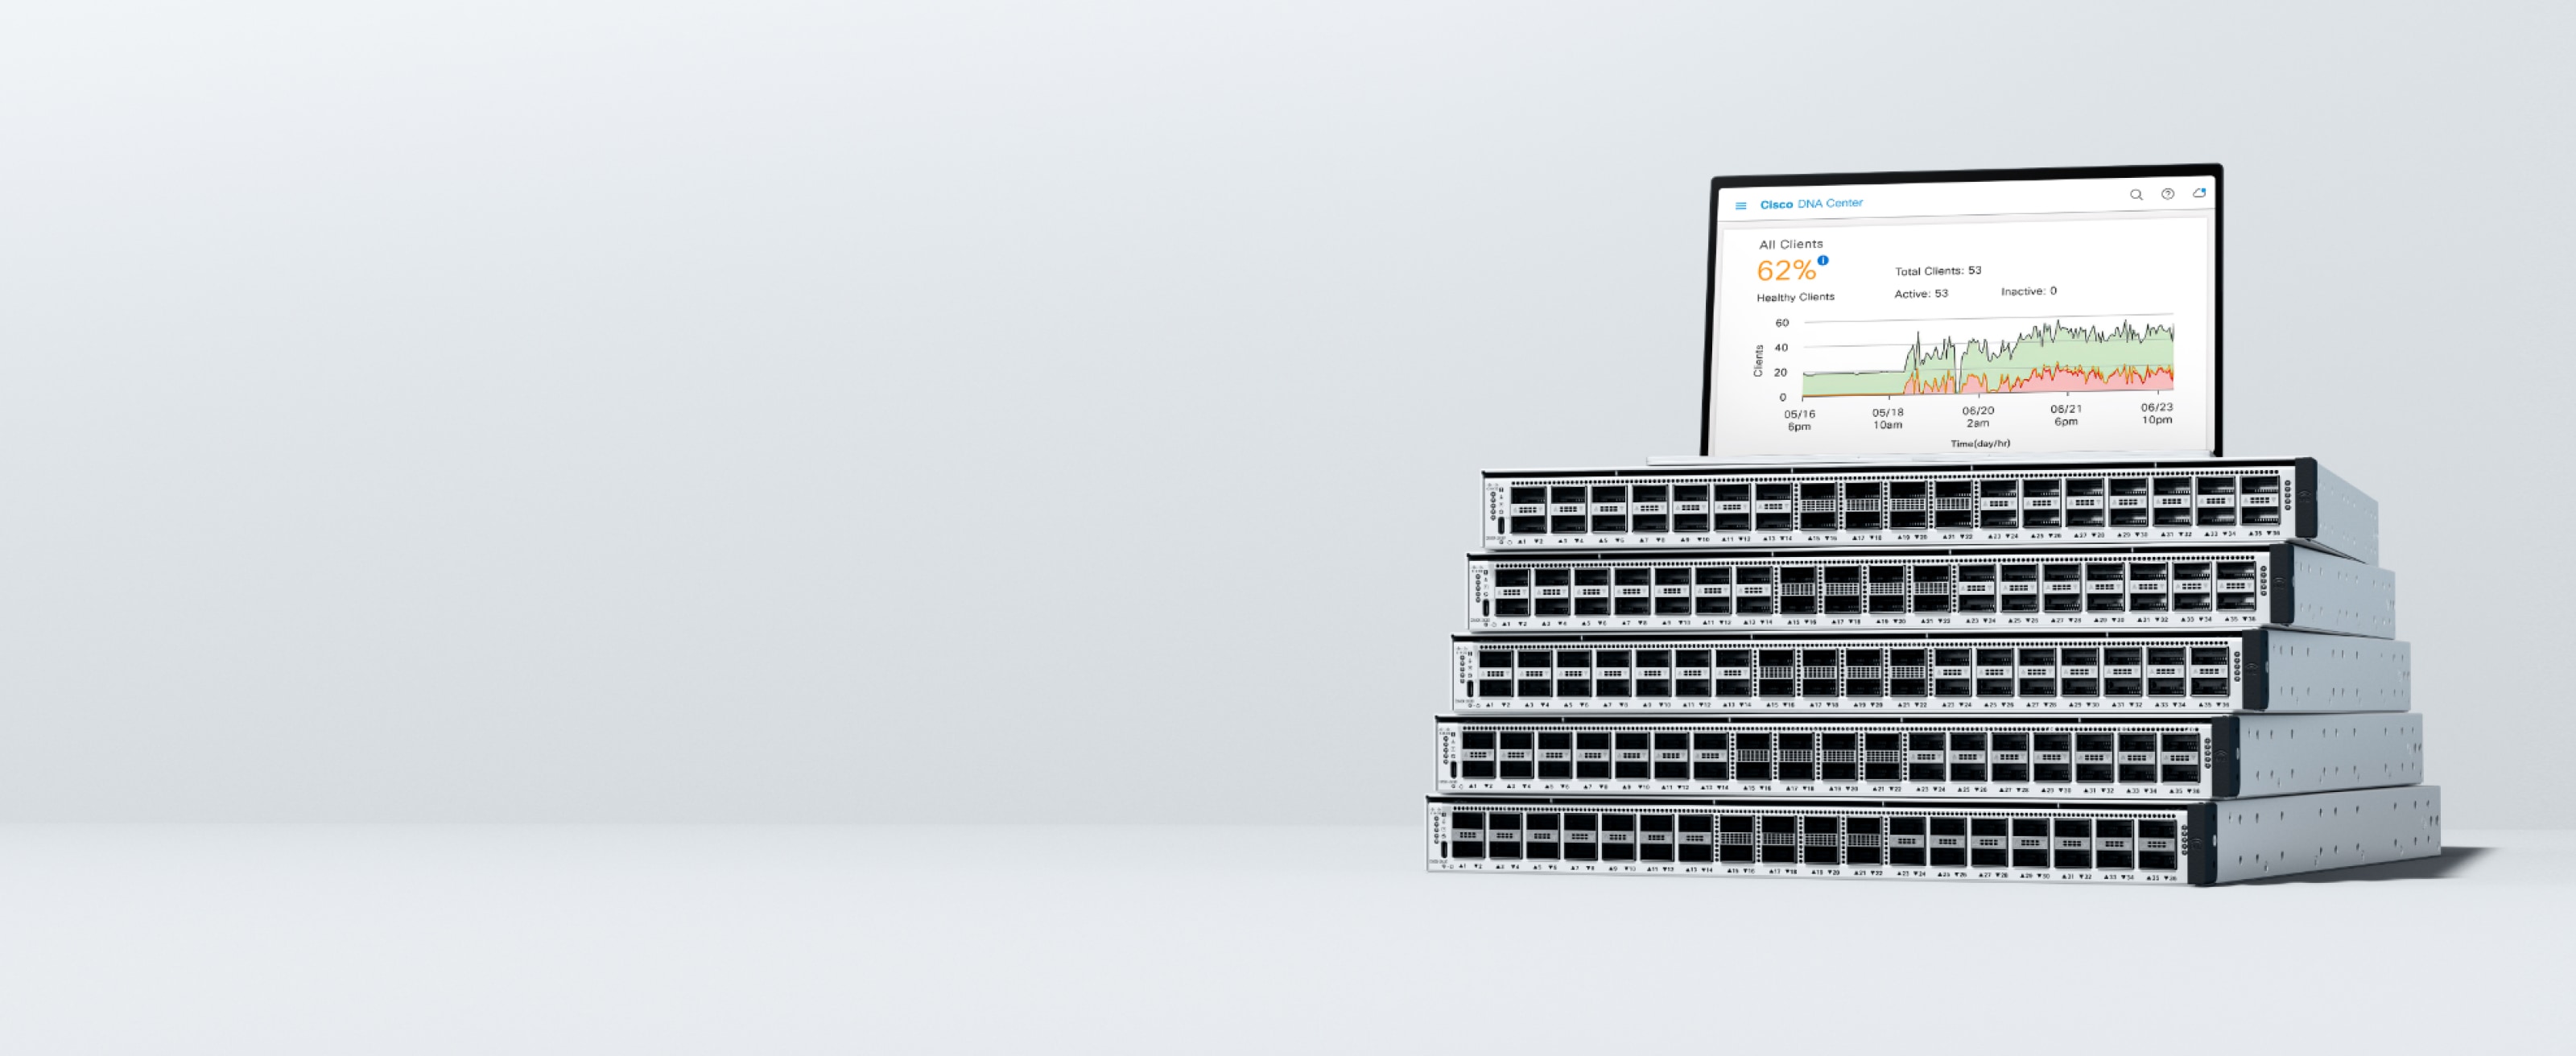 Catalyst 9500 Series Switches: Catalyst 9500X, Catalyst 9500H, and Catalyst 9500 models